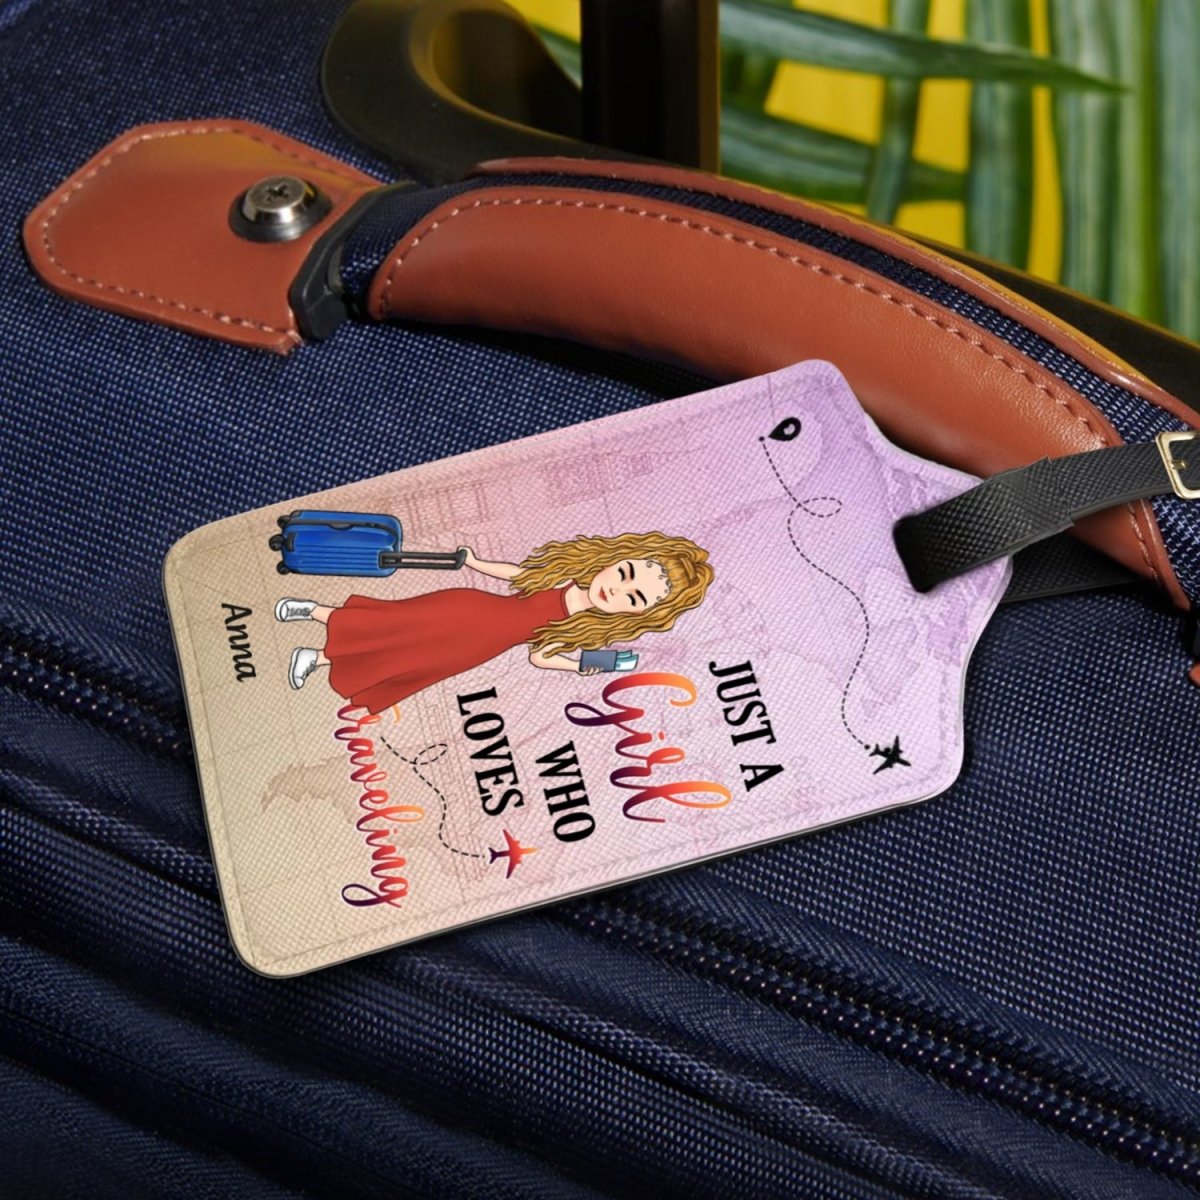 Travel Lovers - Just A Girl Boy Who Loves Traveling - Personalized Luggage Tag - The Next Custom Gift